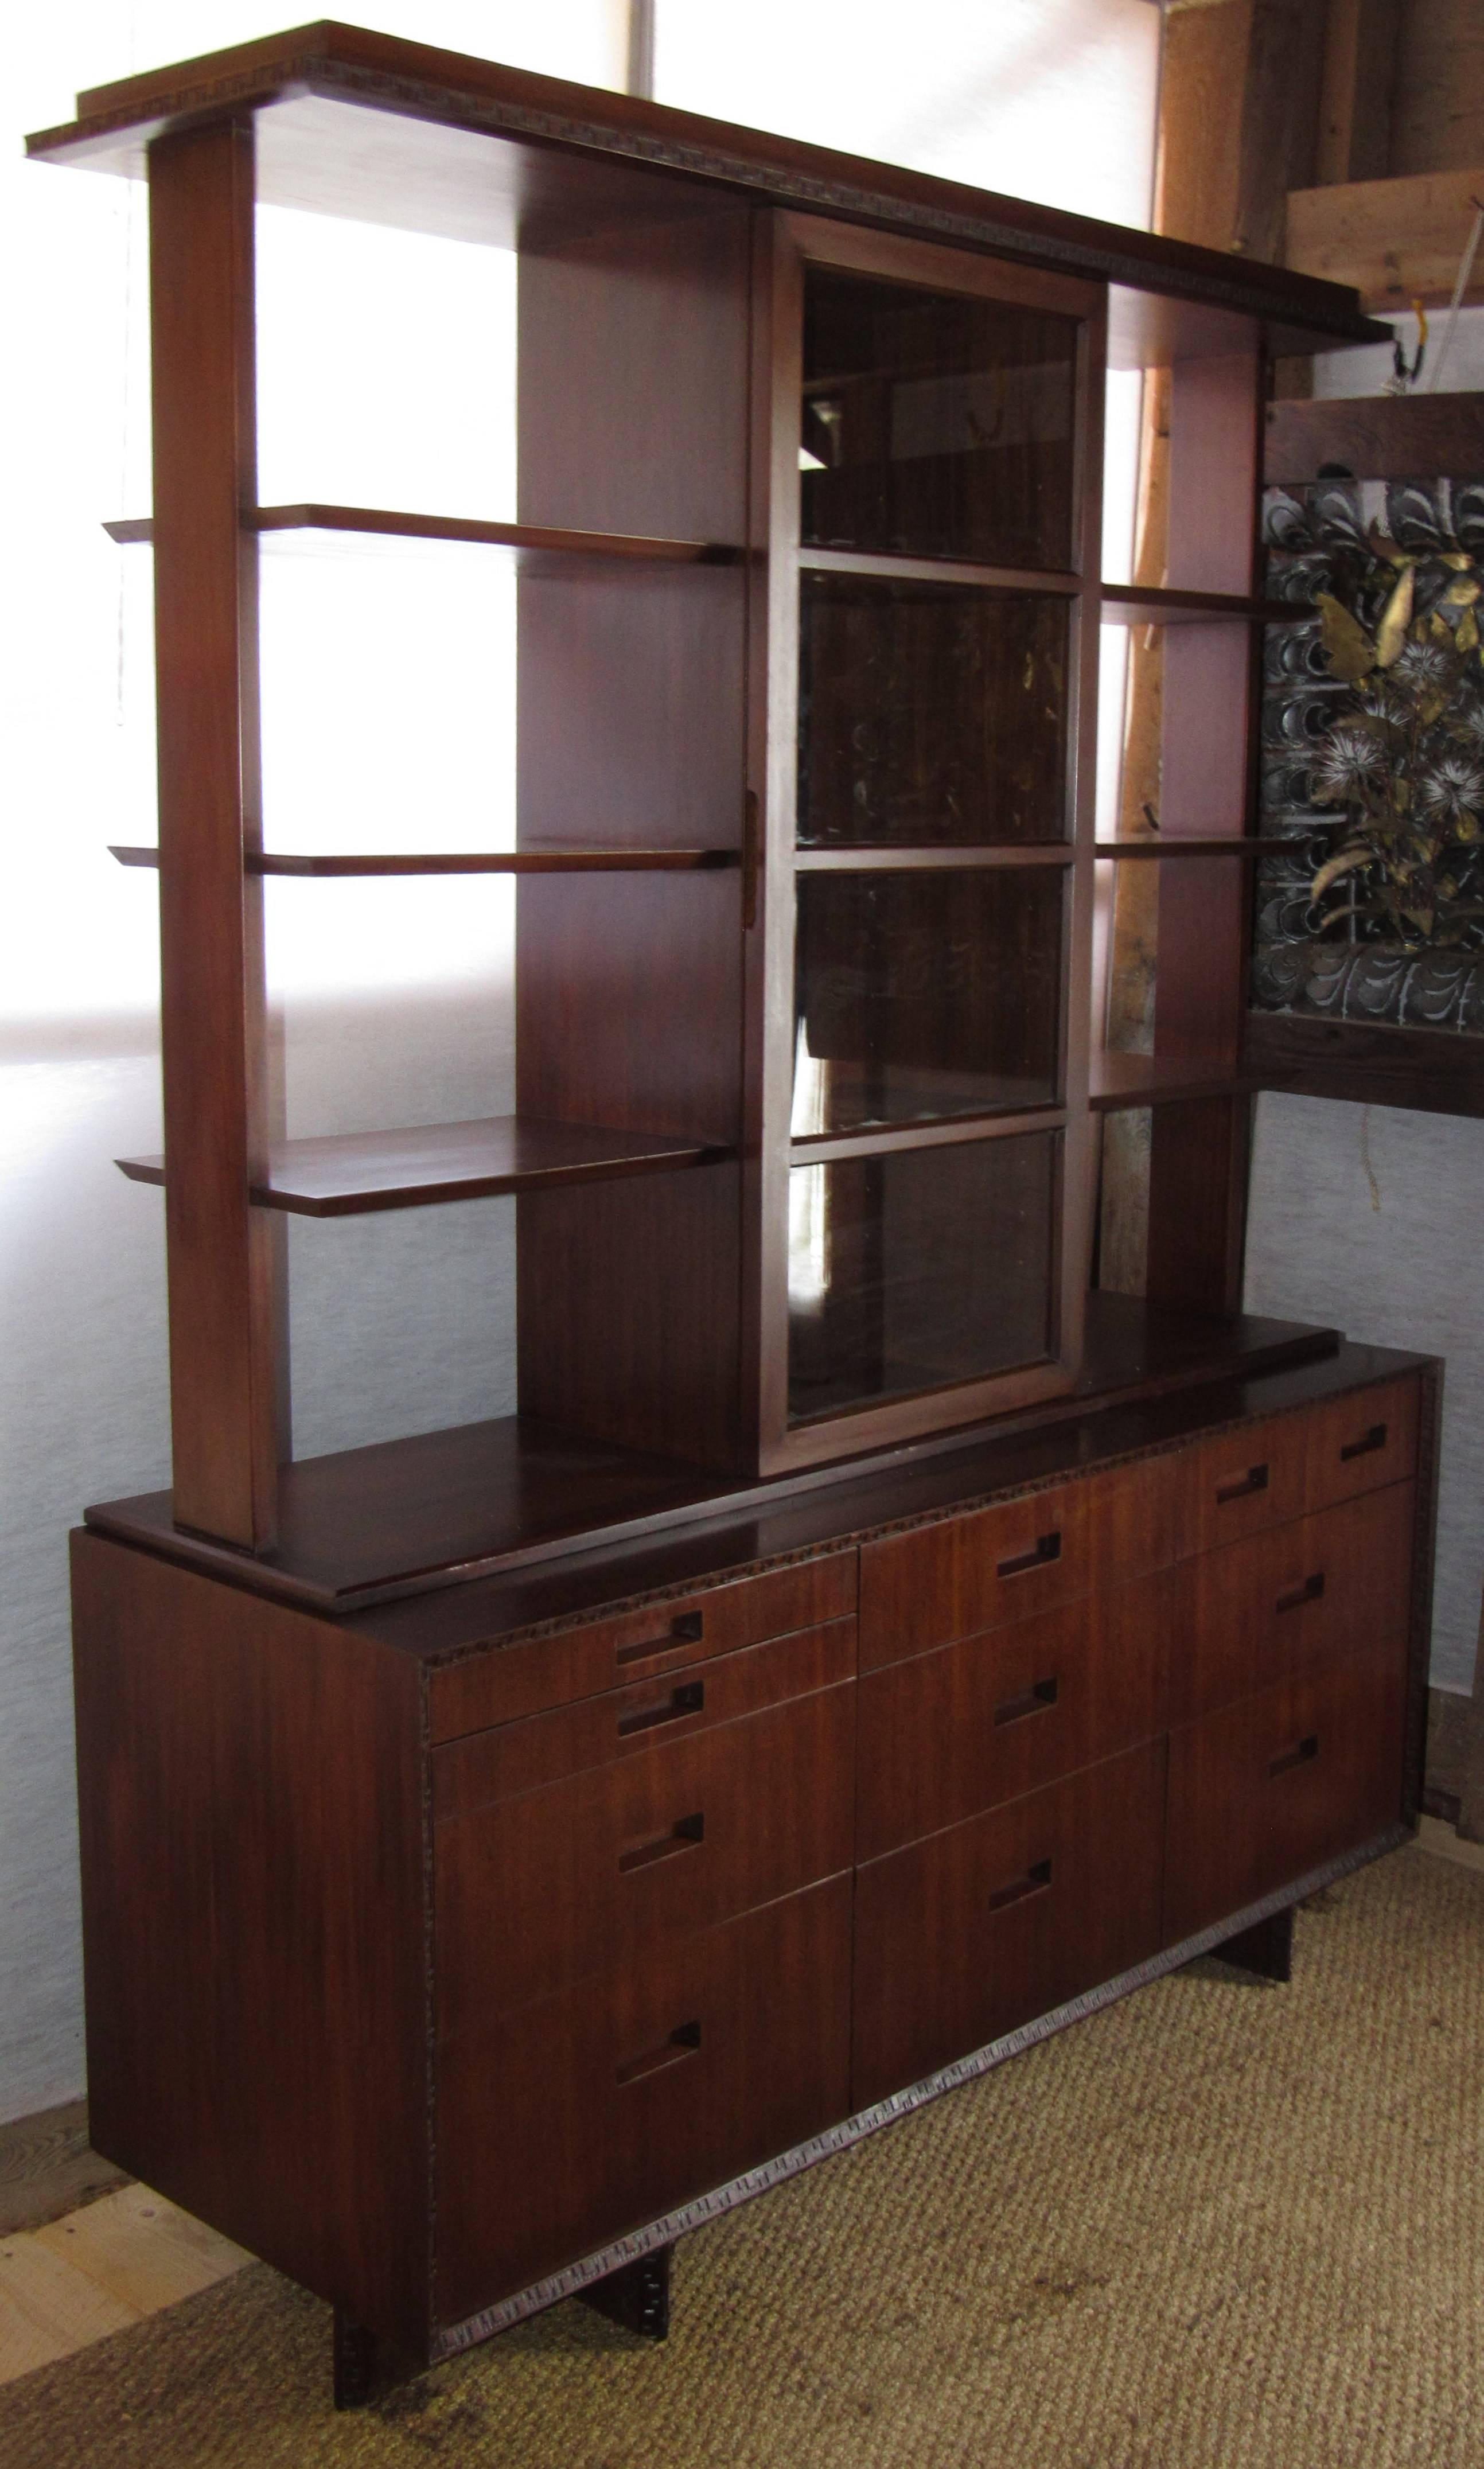 Beautiful mahogany sideboard / china closet designed by Frank Lloyd Wright for Heritage Henredon in 1955 as part of his Taliesin line.
The credenza has been professionally conserved and is in excellent condition. Please contact me if you need any